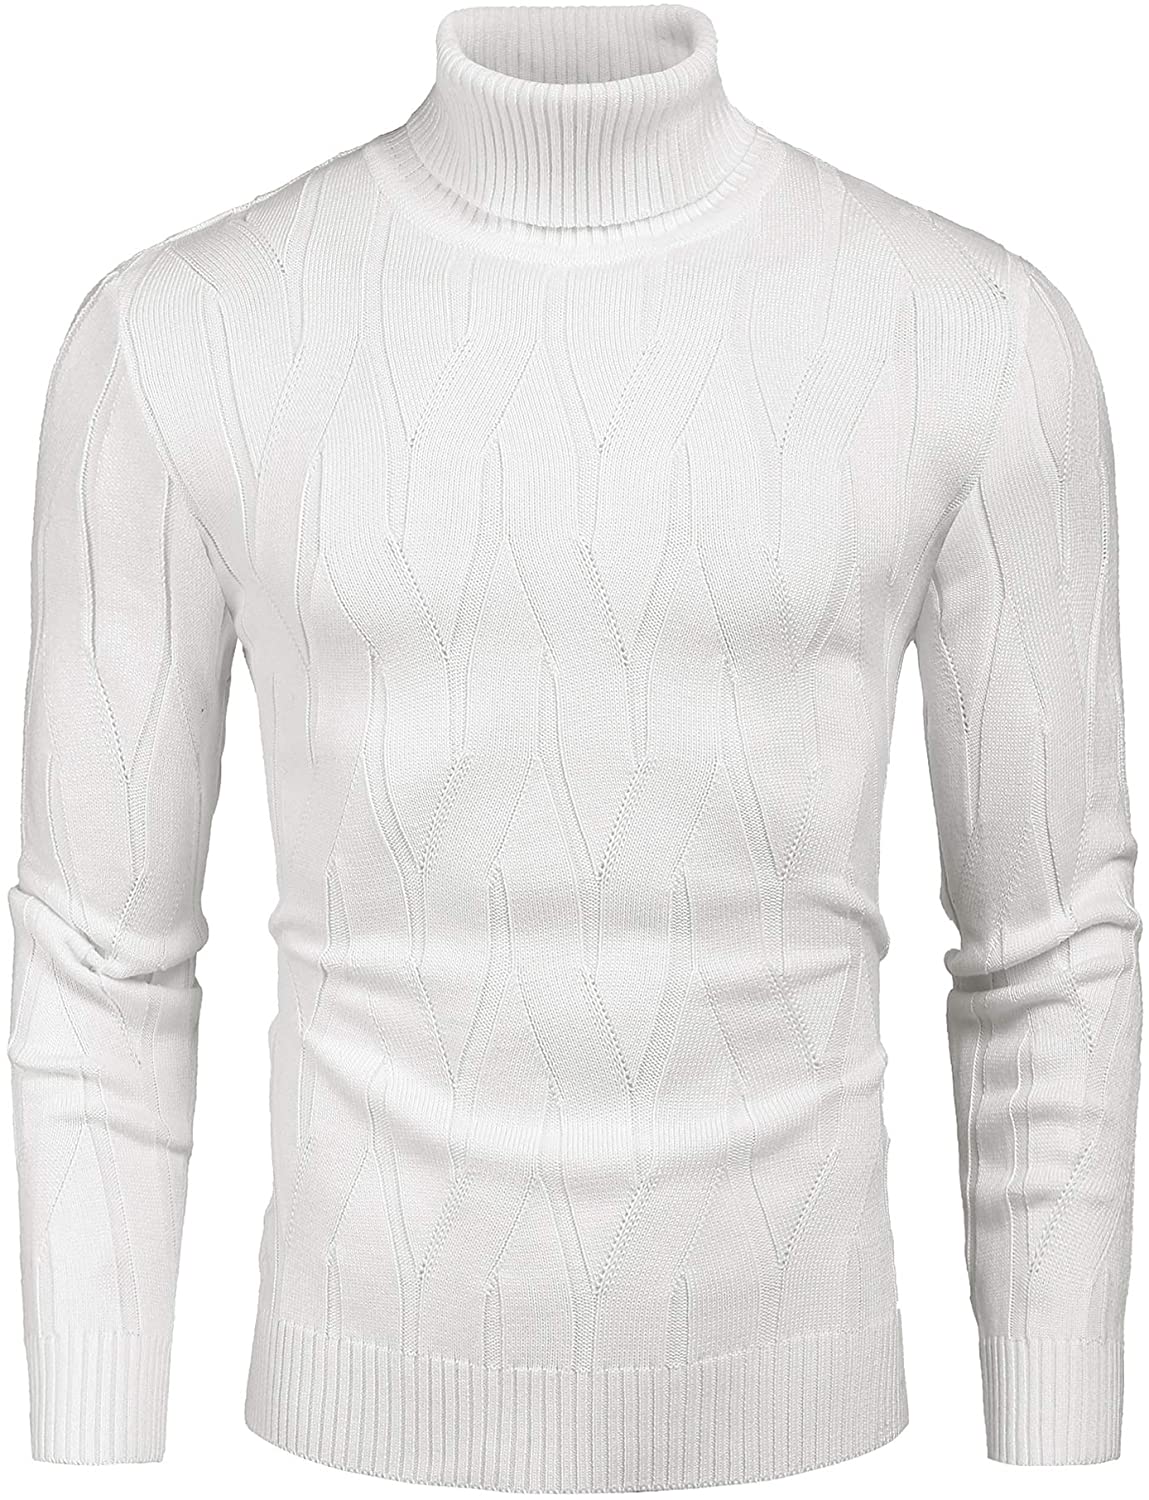 COOFANDY Men's Slim Fit Turtleneck Sweater Casual Knitted Pullover Sweaters